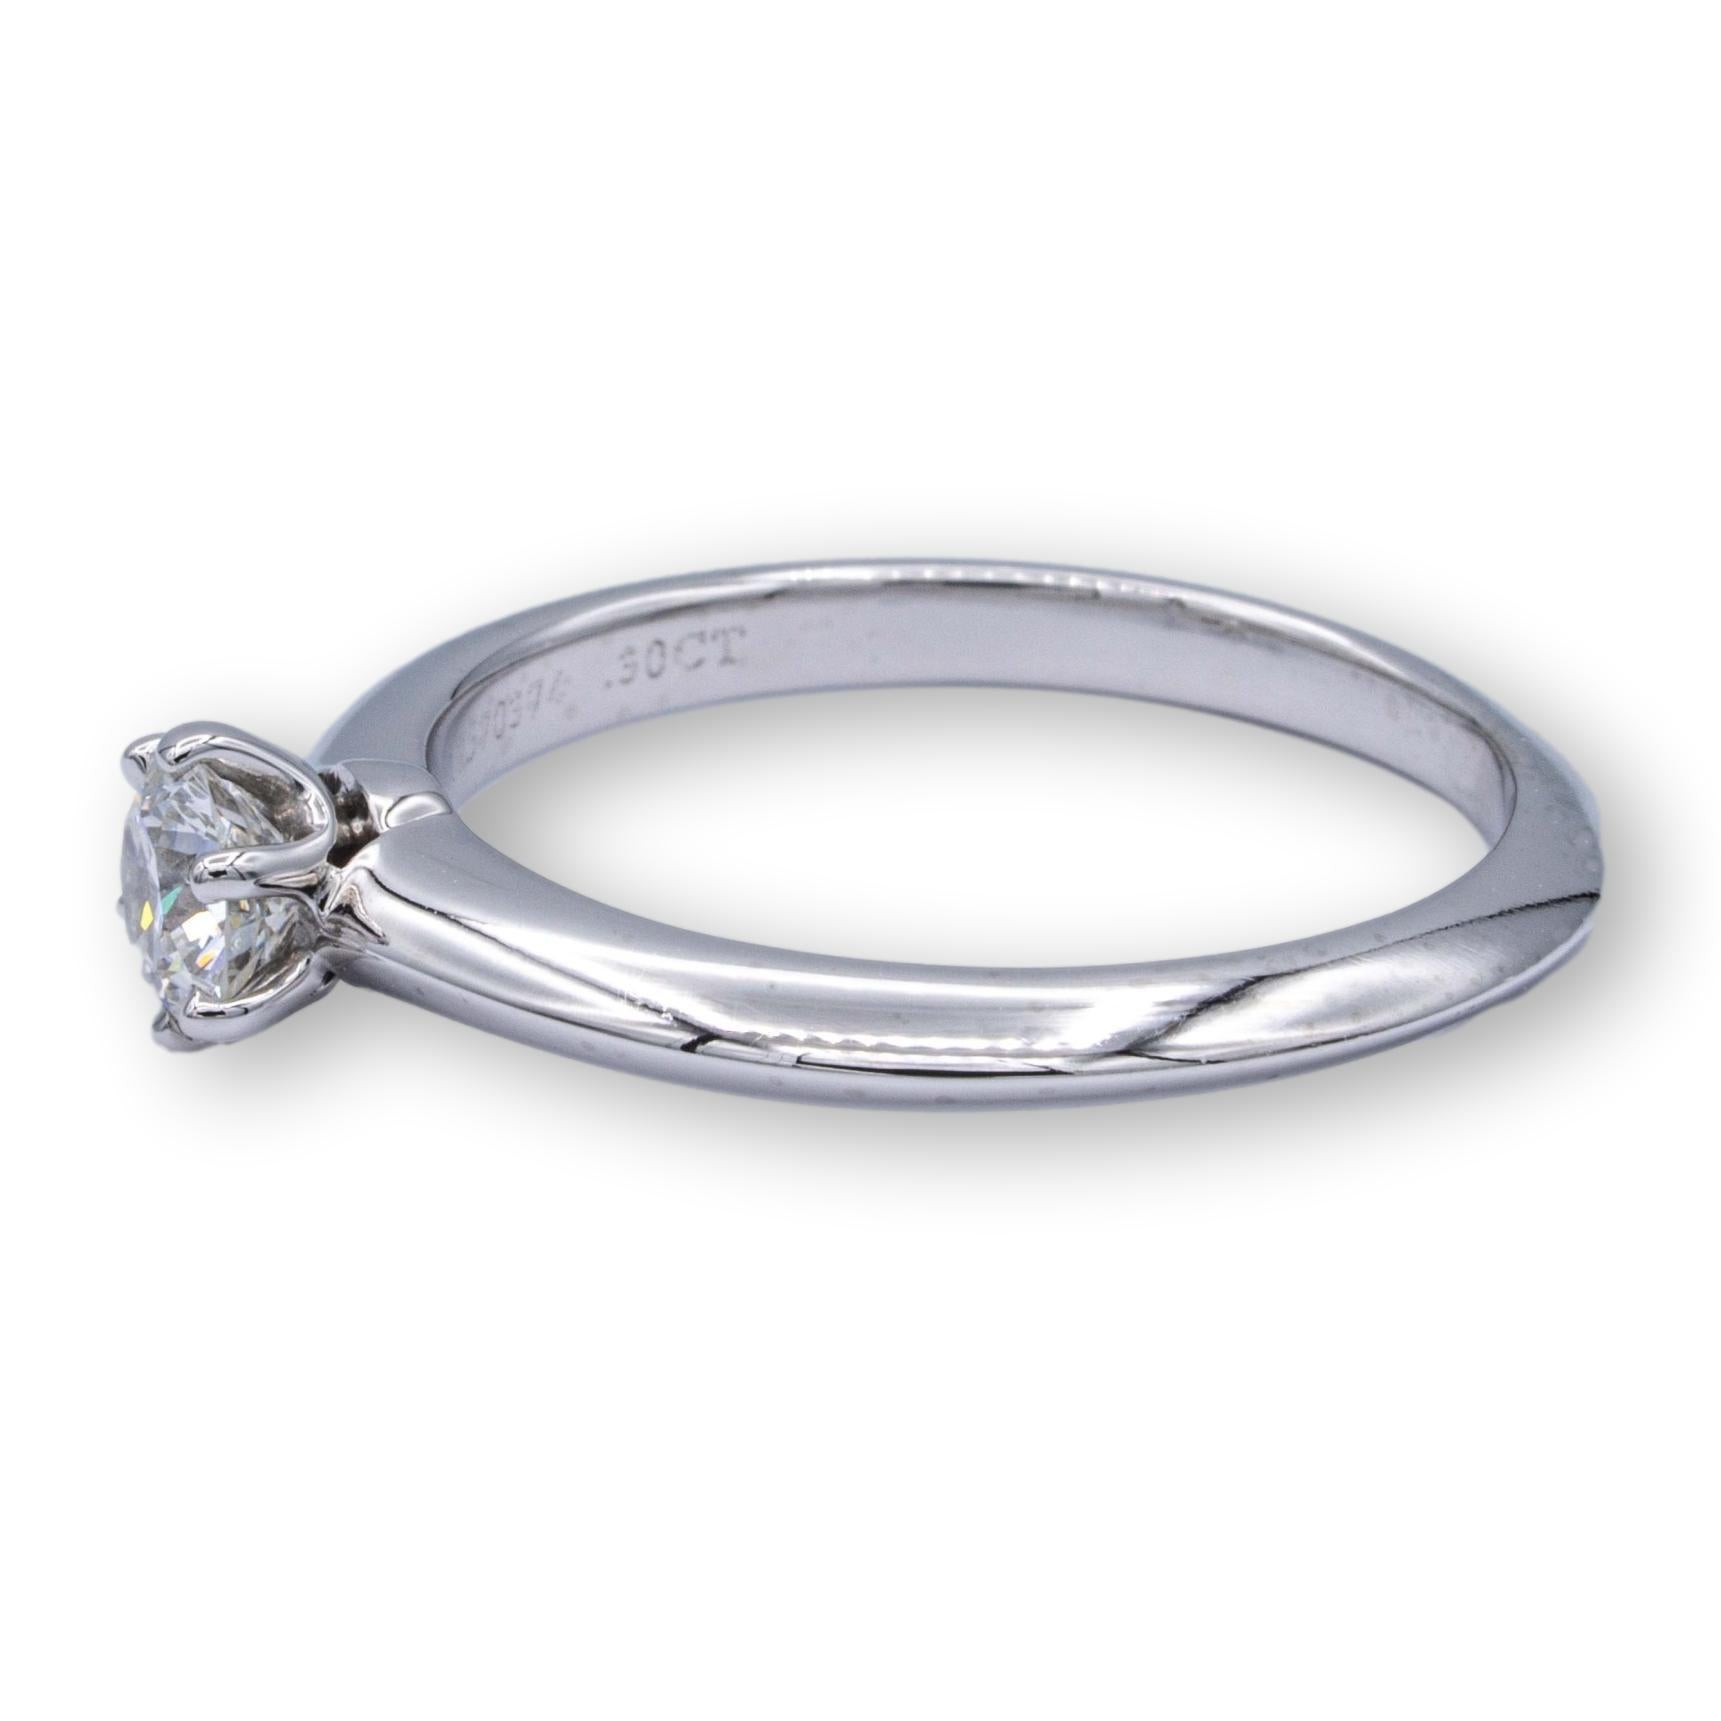 Round Cut Tiffany & Co. Platinum Solitaire Diamond Engagement Ring with Round 0.30 FVS1